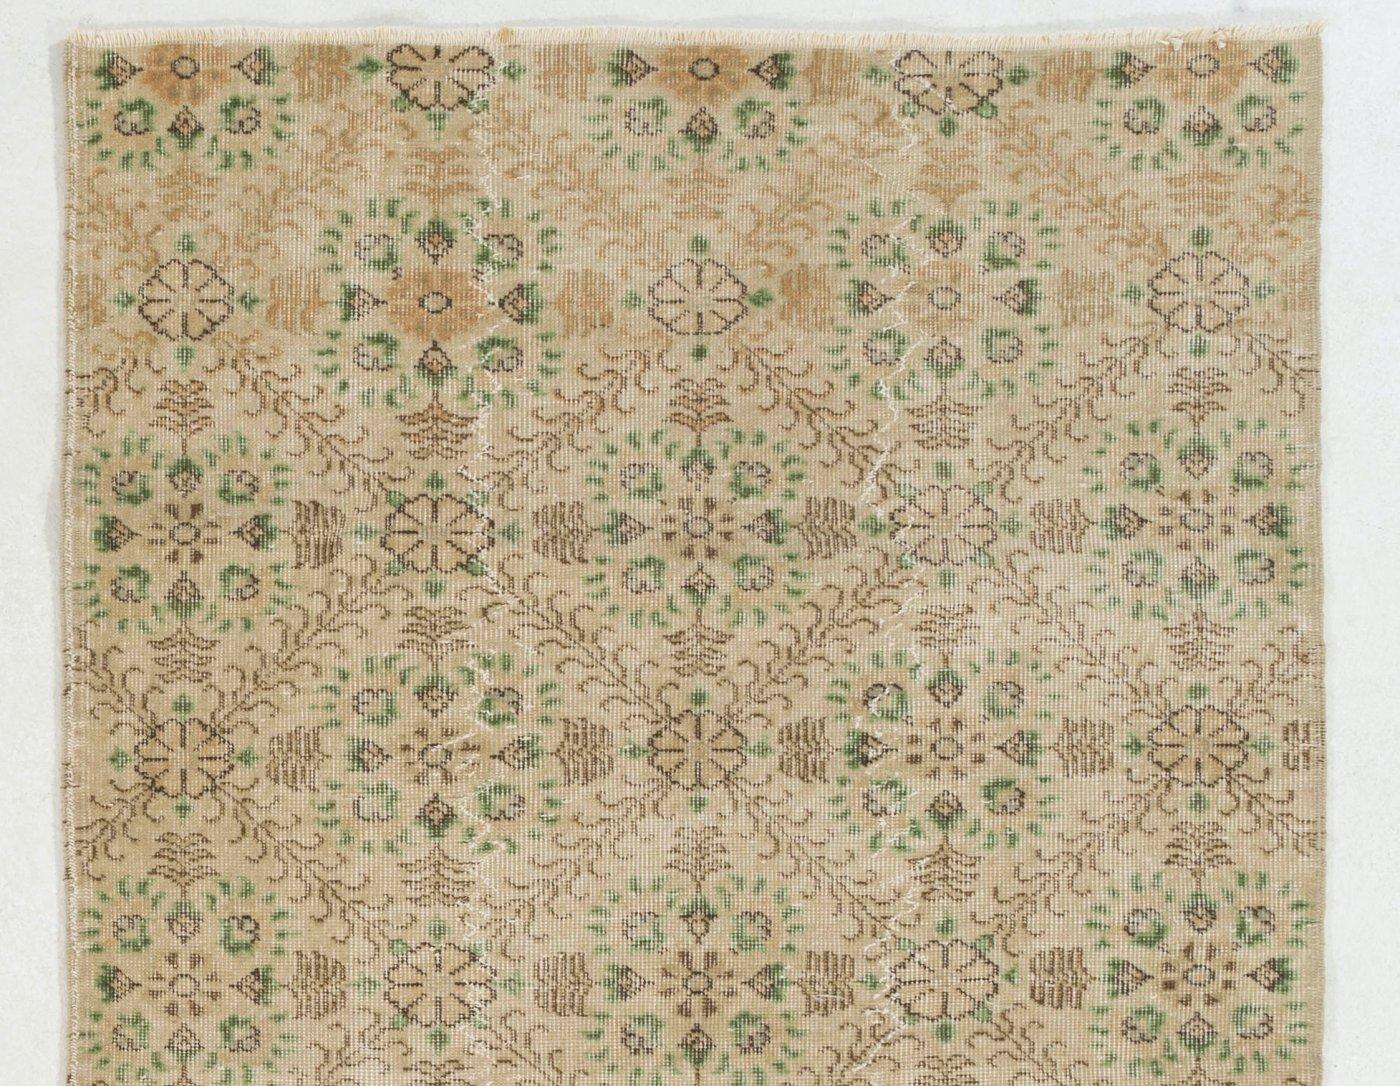 A vintage hand-knotted rug from Central Turkey with a well-drawn design of all-over floral lattices in softly glowing tones of very light peach and beige as well as forest green and brown . 

The rug is finely hand-knotted with even medium wool pile